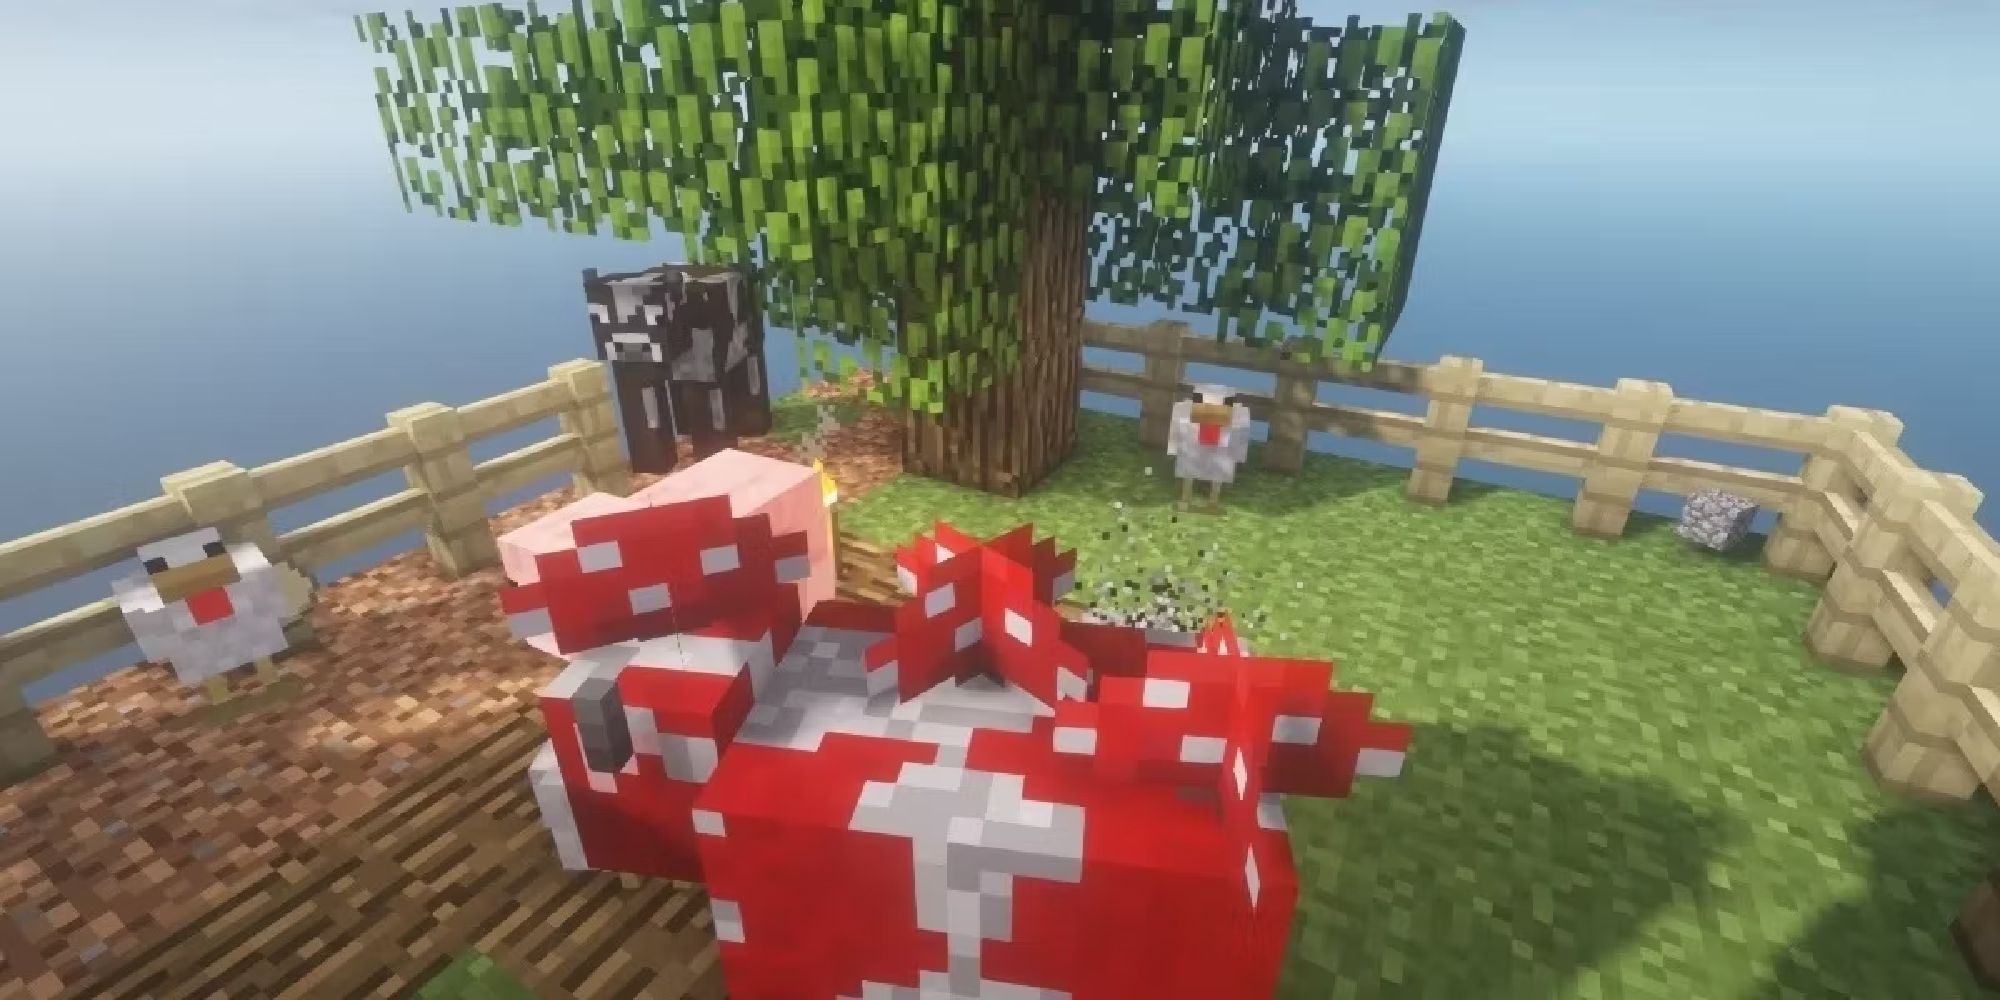 minecraft fenced in area with chickens, cows, and a mooshroom